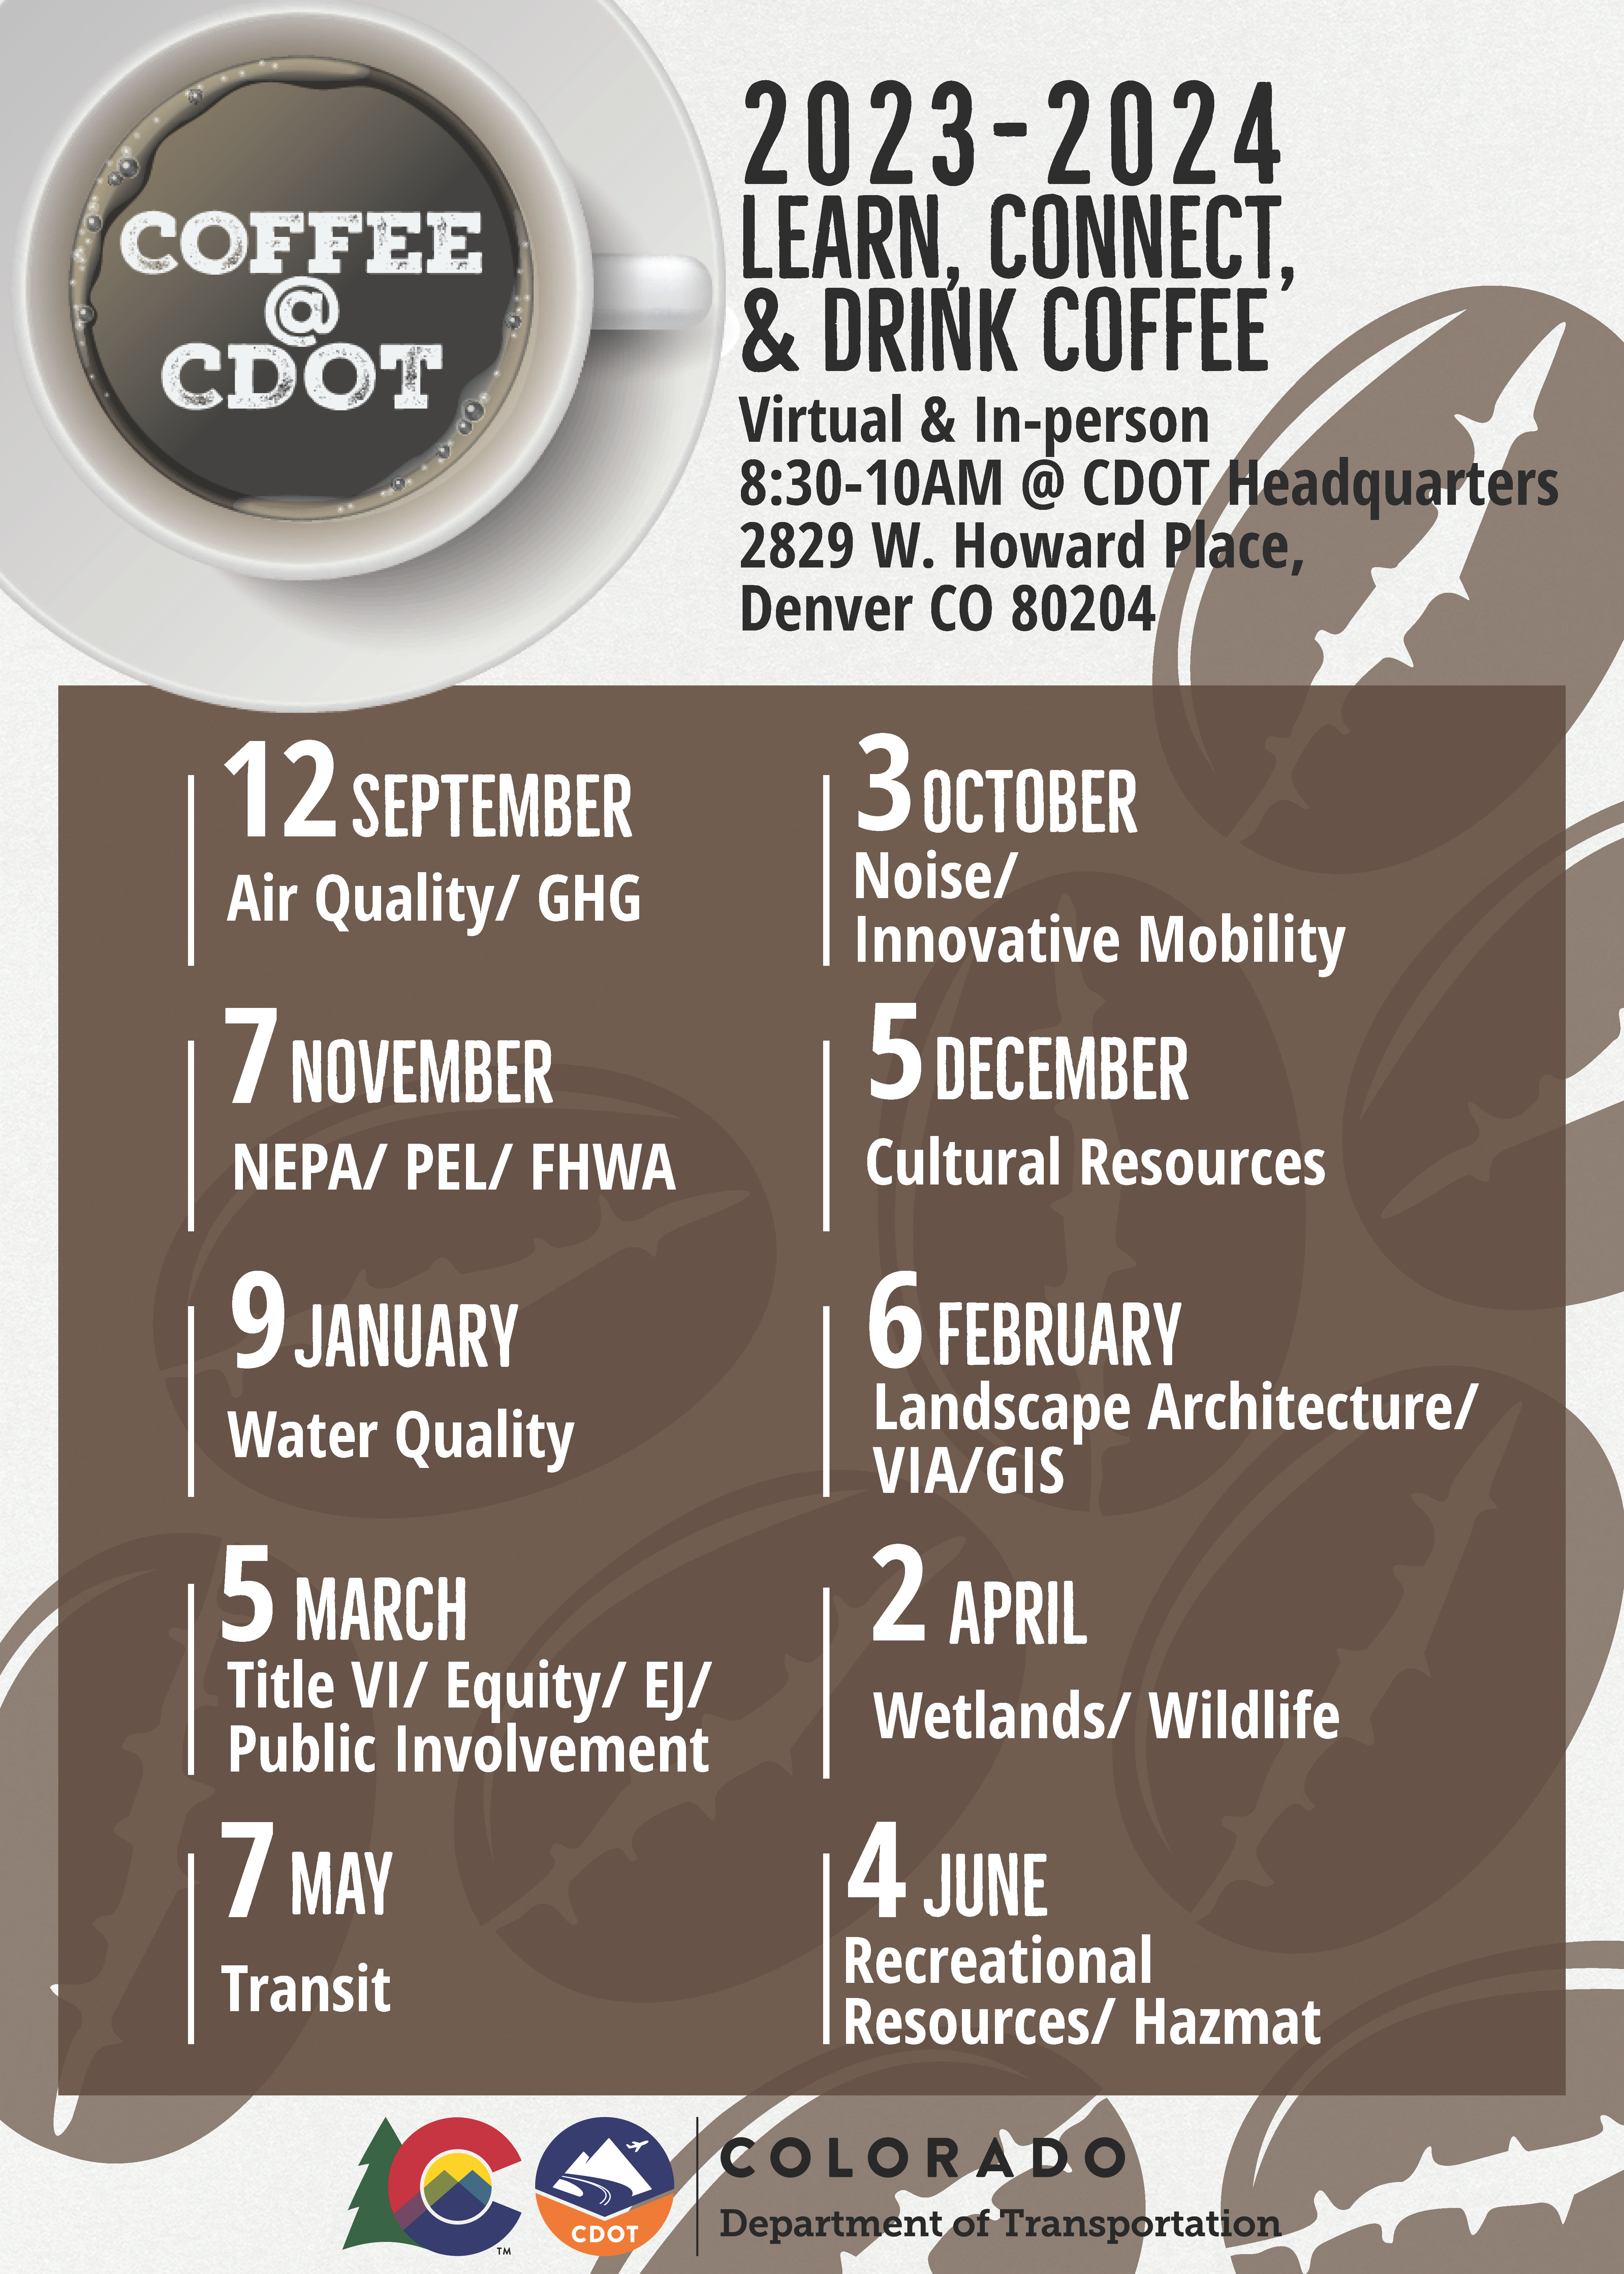 Coffee Schedule.png detail image